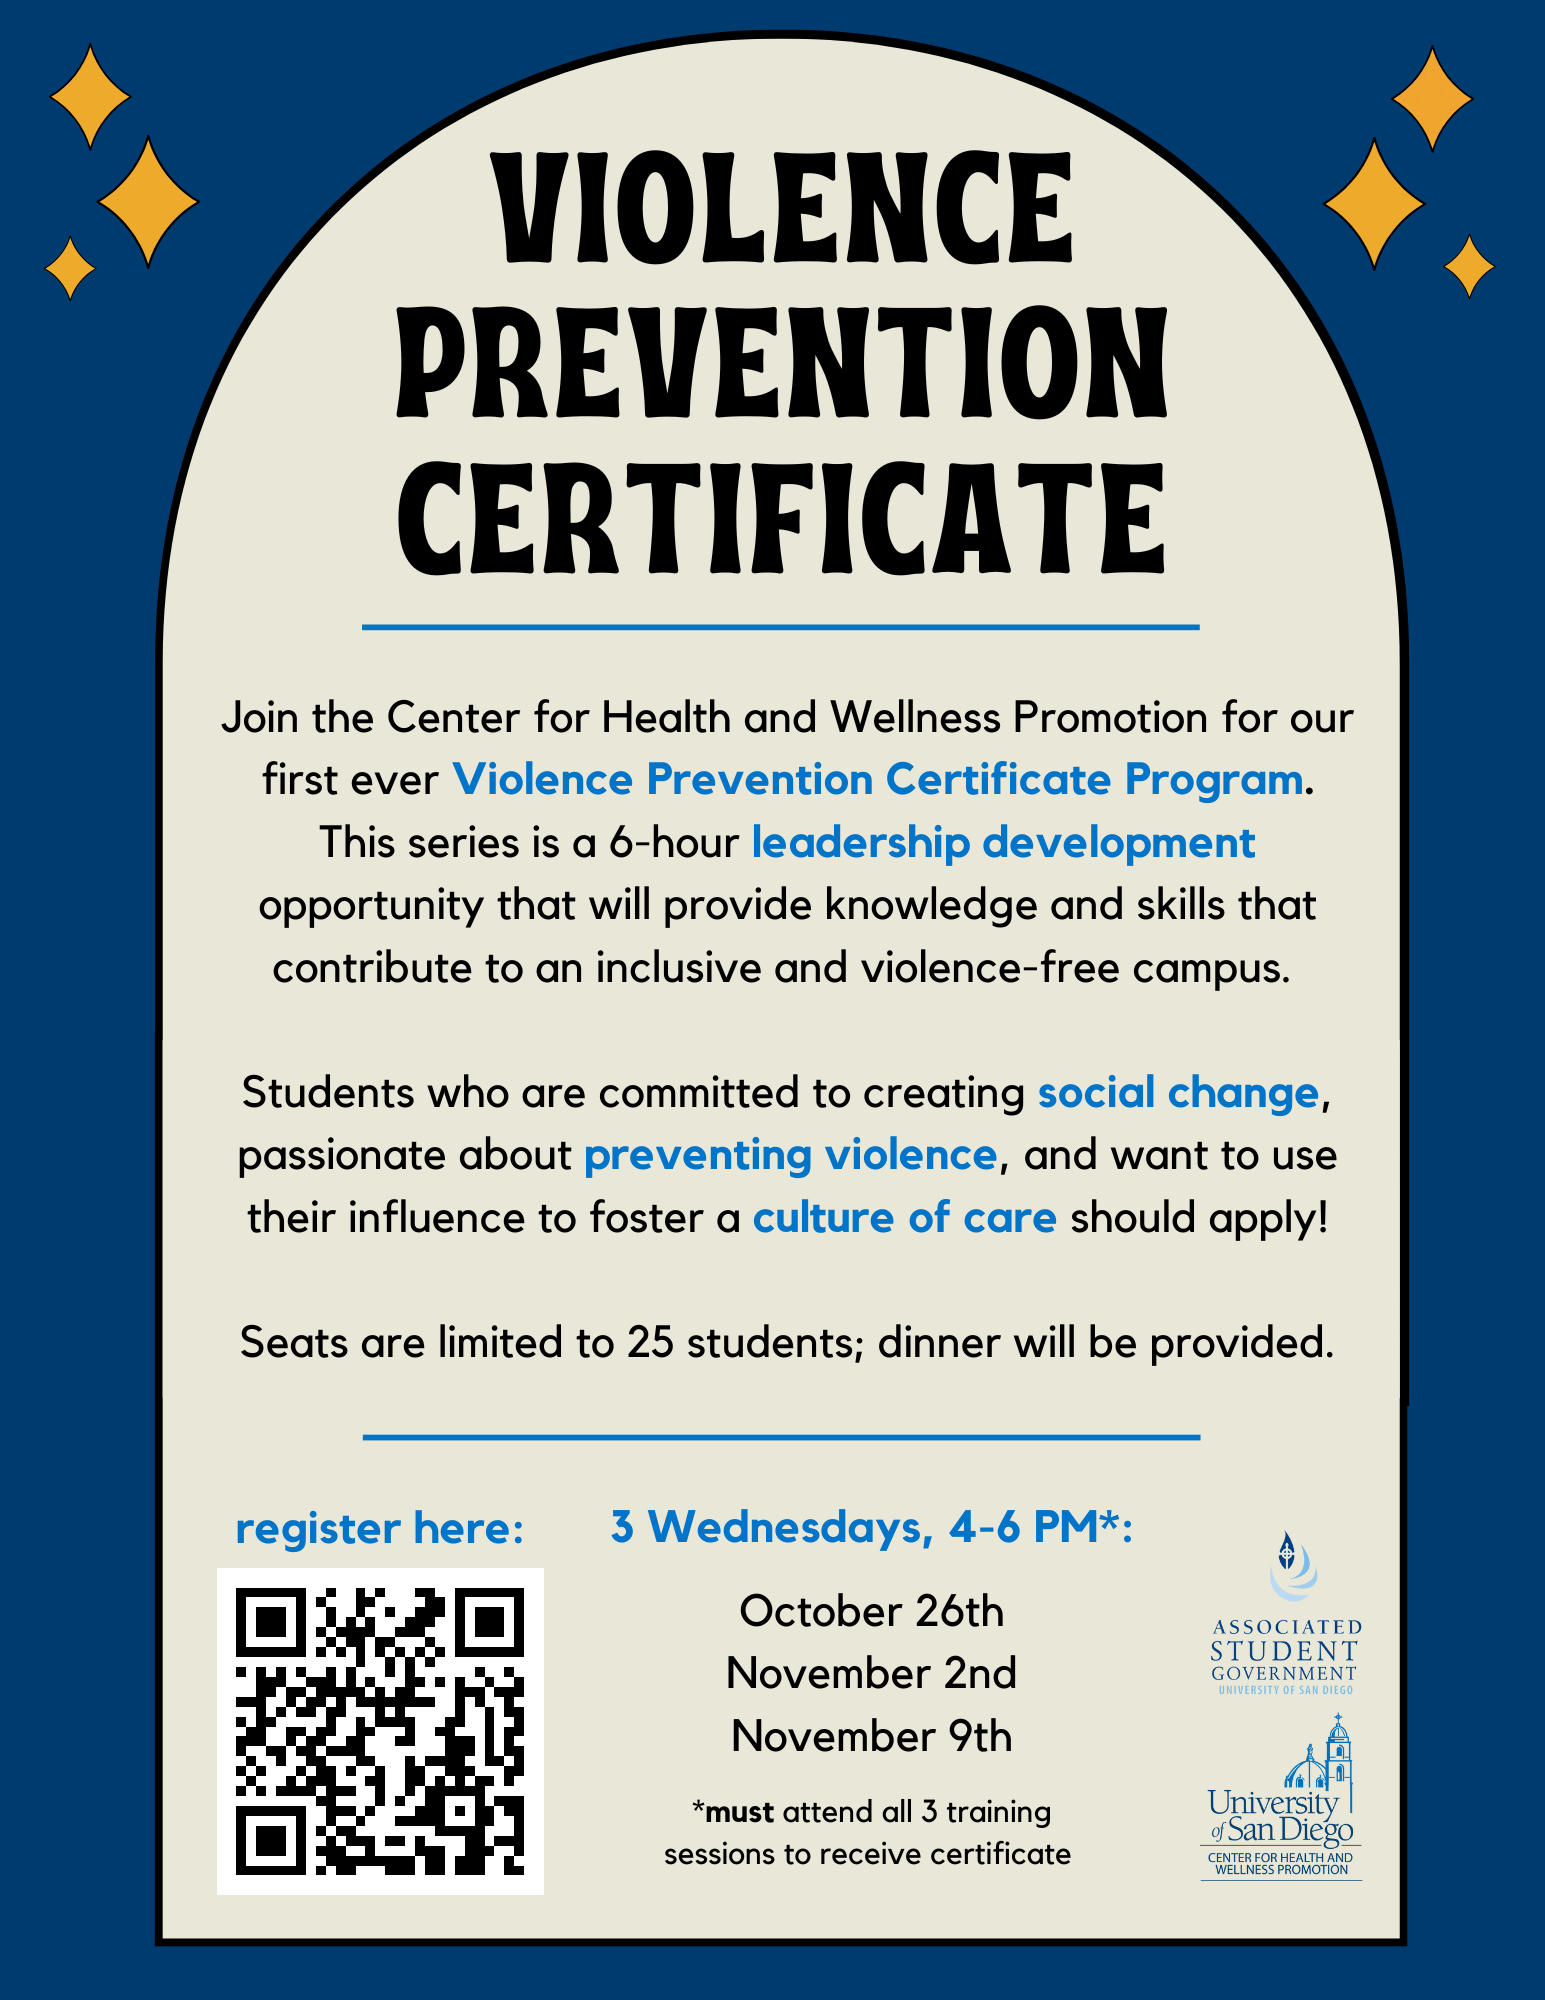 Blue background with a curved box. Text says: Join the Center for Health and Wellness Promotion for our first ever Violence Prevention Certificate Program. This series is a 6-hour leadership development opportunity that will provide knowledge and skills that contribute to an inclusive and violence-free campus. Students who are committed to creating social change, passionate about preventing violence, and want to use their influence to foster a culture of care should apply! Seats are limited to 25 students; dinner will be provided. 3 Wednesdays, 4-6 PM*: October 26th, November 2nd, November 9th. *must attend all 3 training sessions to receive certificate. Includes a QR code to register and logos for ASG and CHWP.